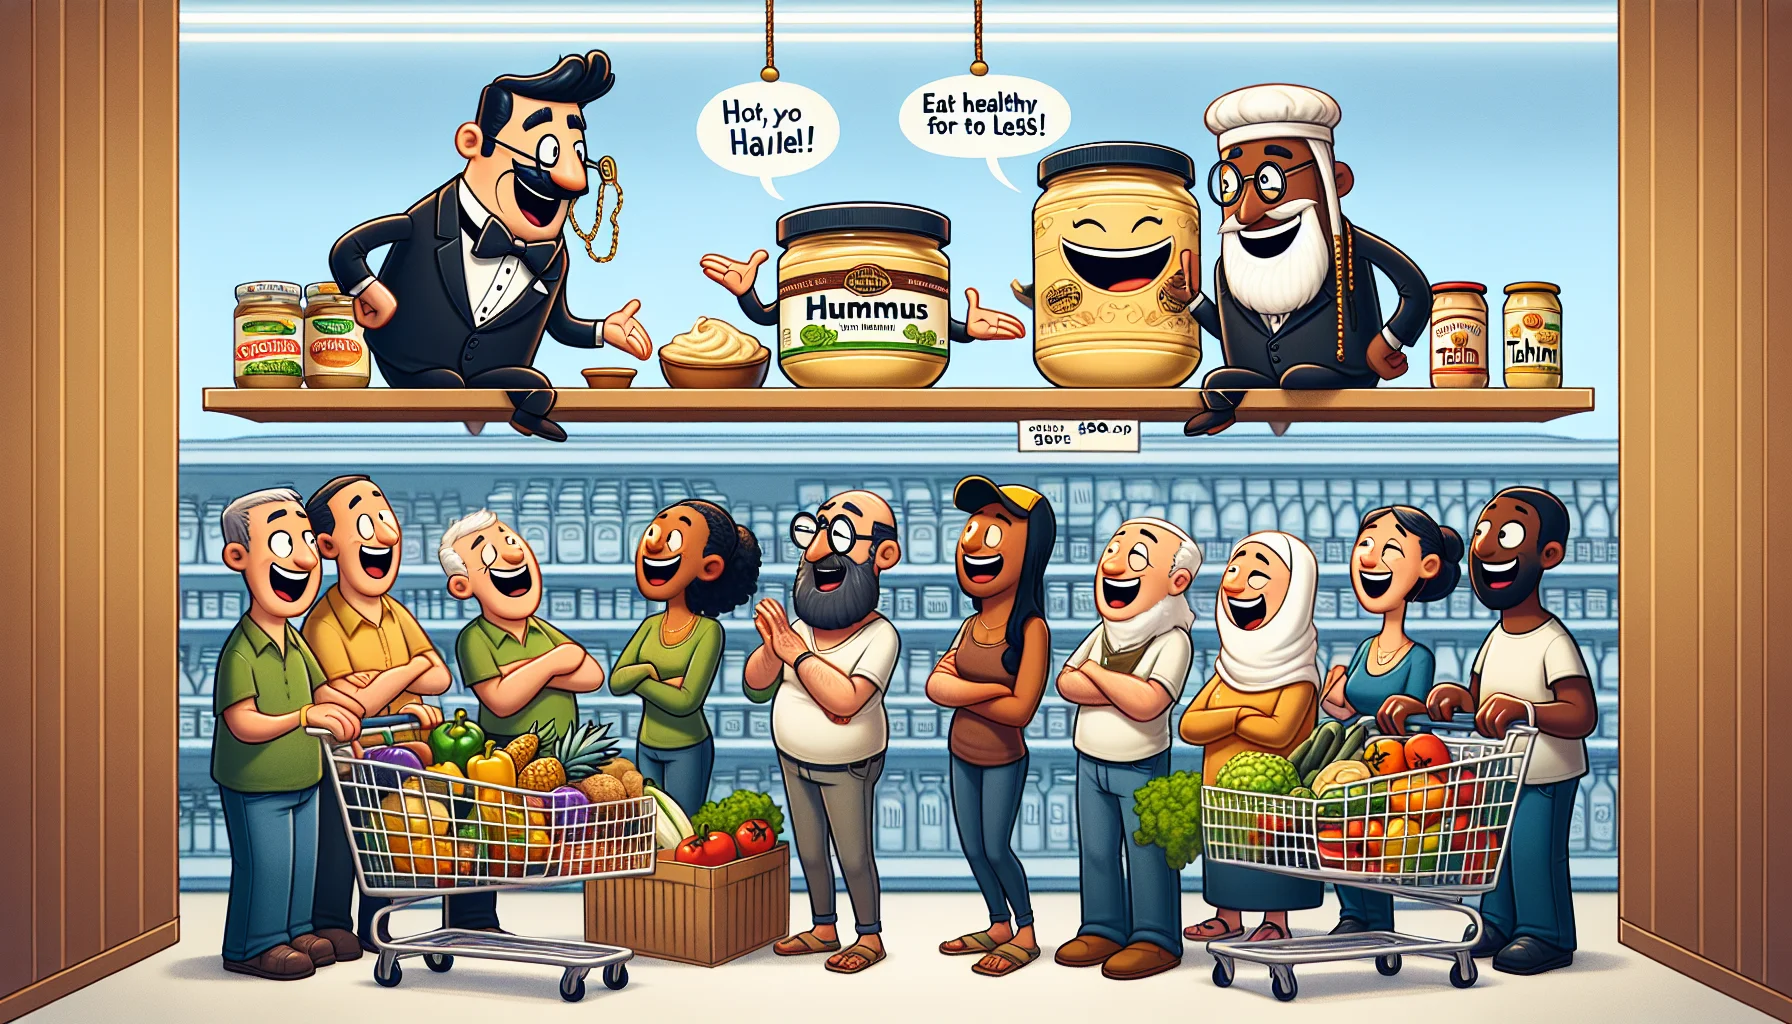 Imagine a comical scene in a grocery store. Two animated jars on the top shelf are having a friendly debate. On one side, we have a fancy jar of hummus, dressed in a classic tuxedo with a monocle, boasting about its rich and creamy texture. On the other side, we have a bottle of tahini, dressed casually in a sports cap and jeans, chuckling and pointing out the cost-effectiveness of cooking at home with tahini as a base. Below them, a variety of enthusiastic customers with varying genders and descents such as a Middle-Eastern woman, a Hispanic man, a South Asian senior, and a young Black man are laughing and watching the argument, their shopping carts filled with fresh fruits, vegetables, and grains. A hanging sign reads, 'Eat Healthy for Less!'